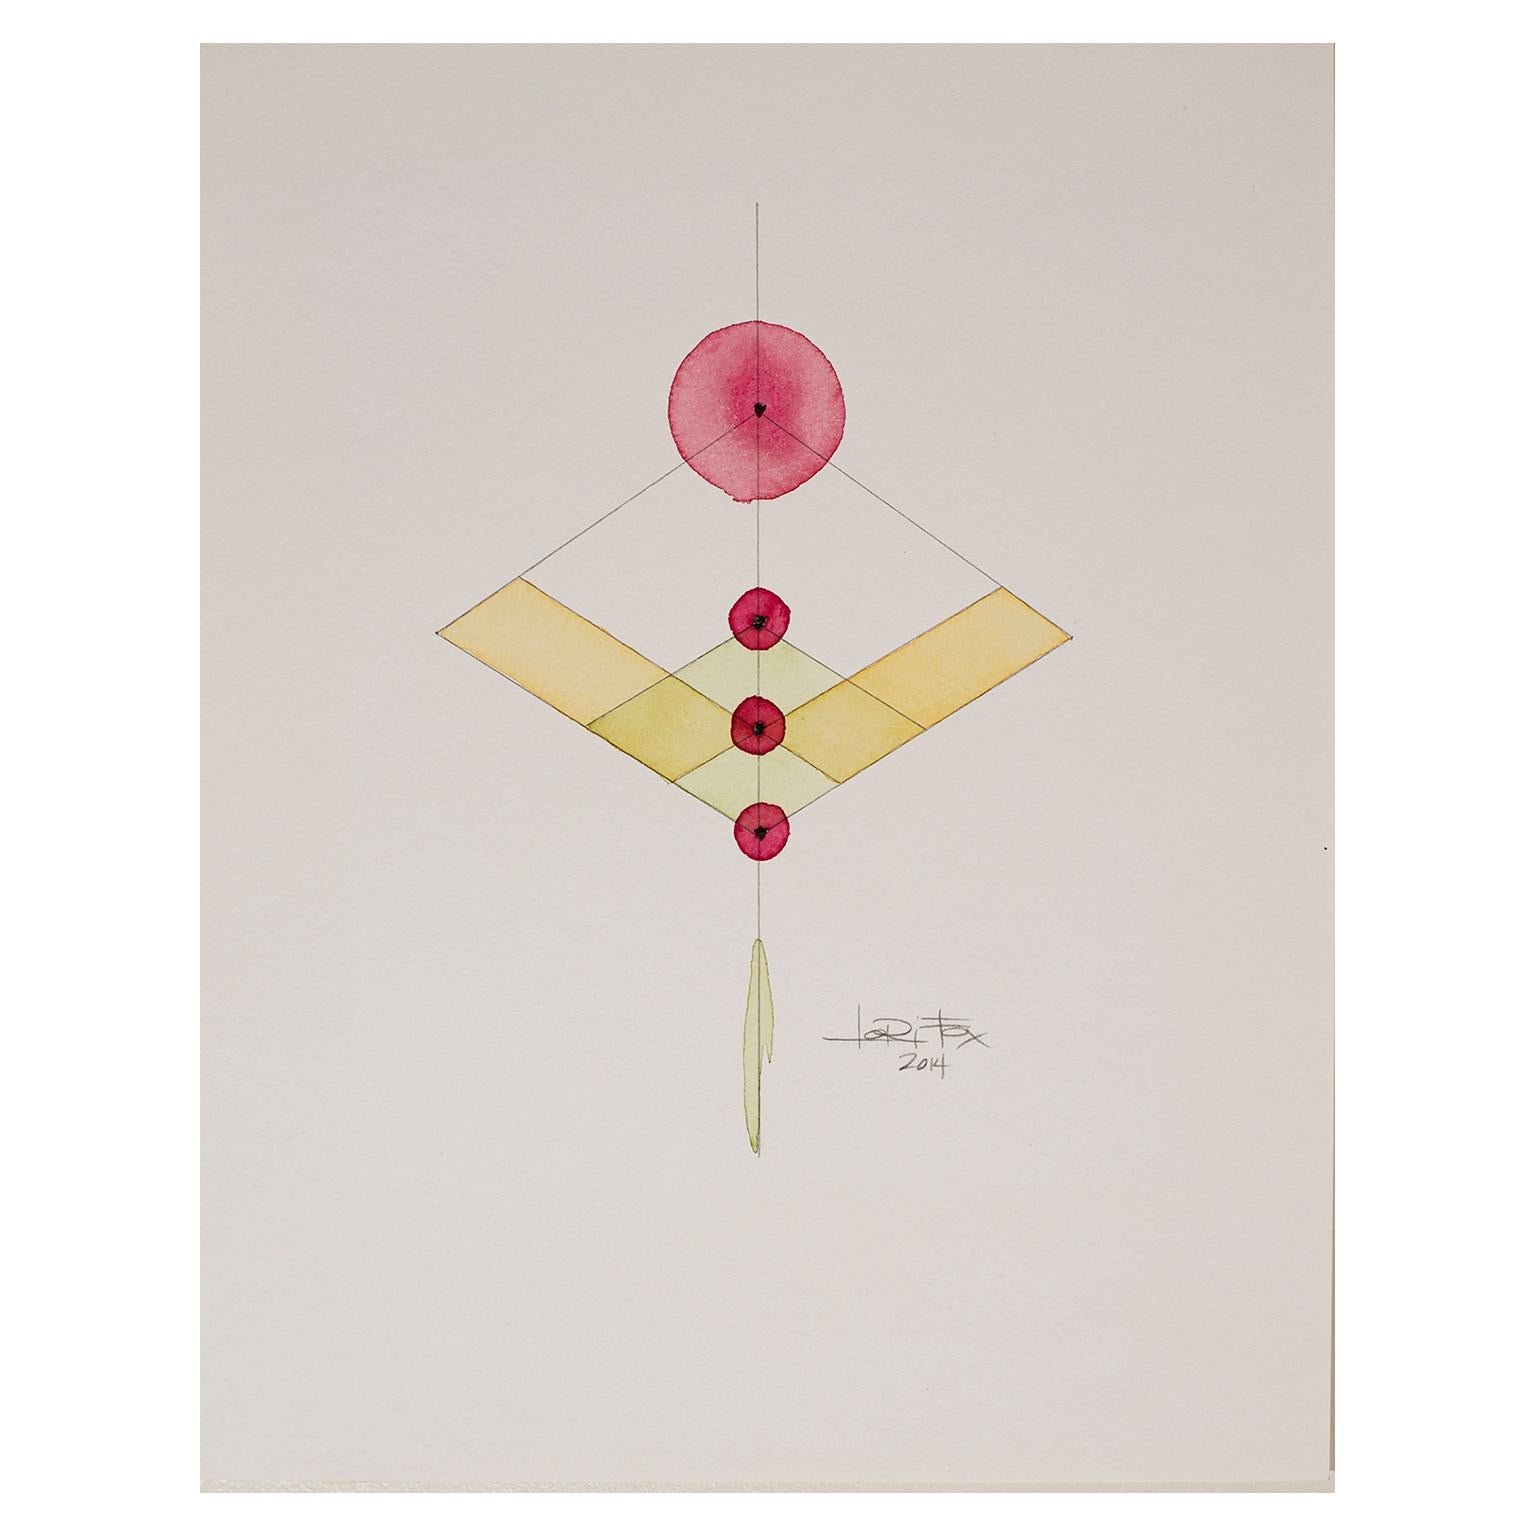 Totem 2.008 by Lori Fox. Abstract geometric yellow, red watercolour on paper im Angebot 1